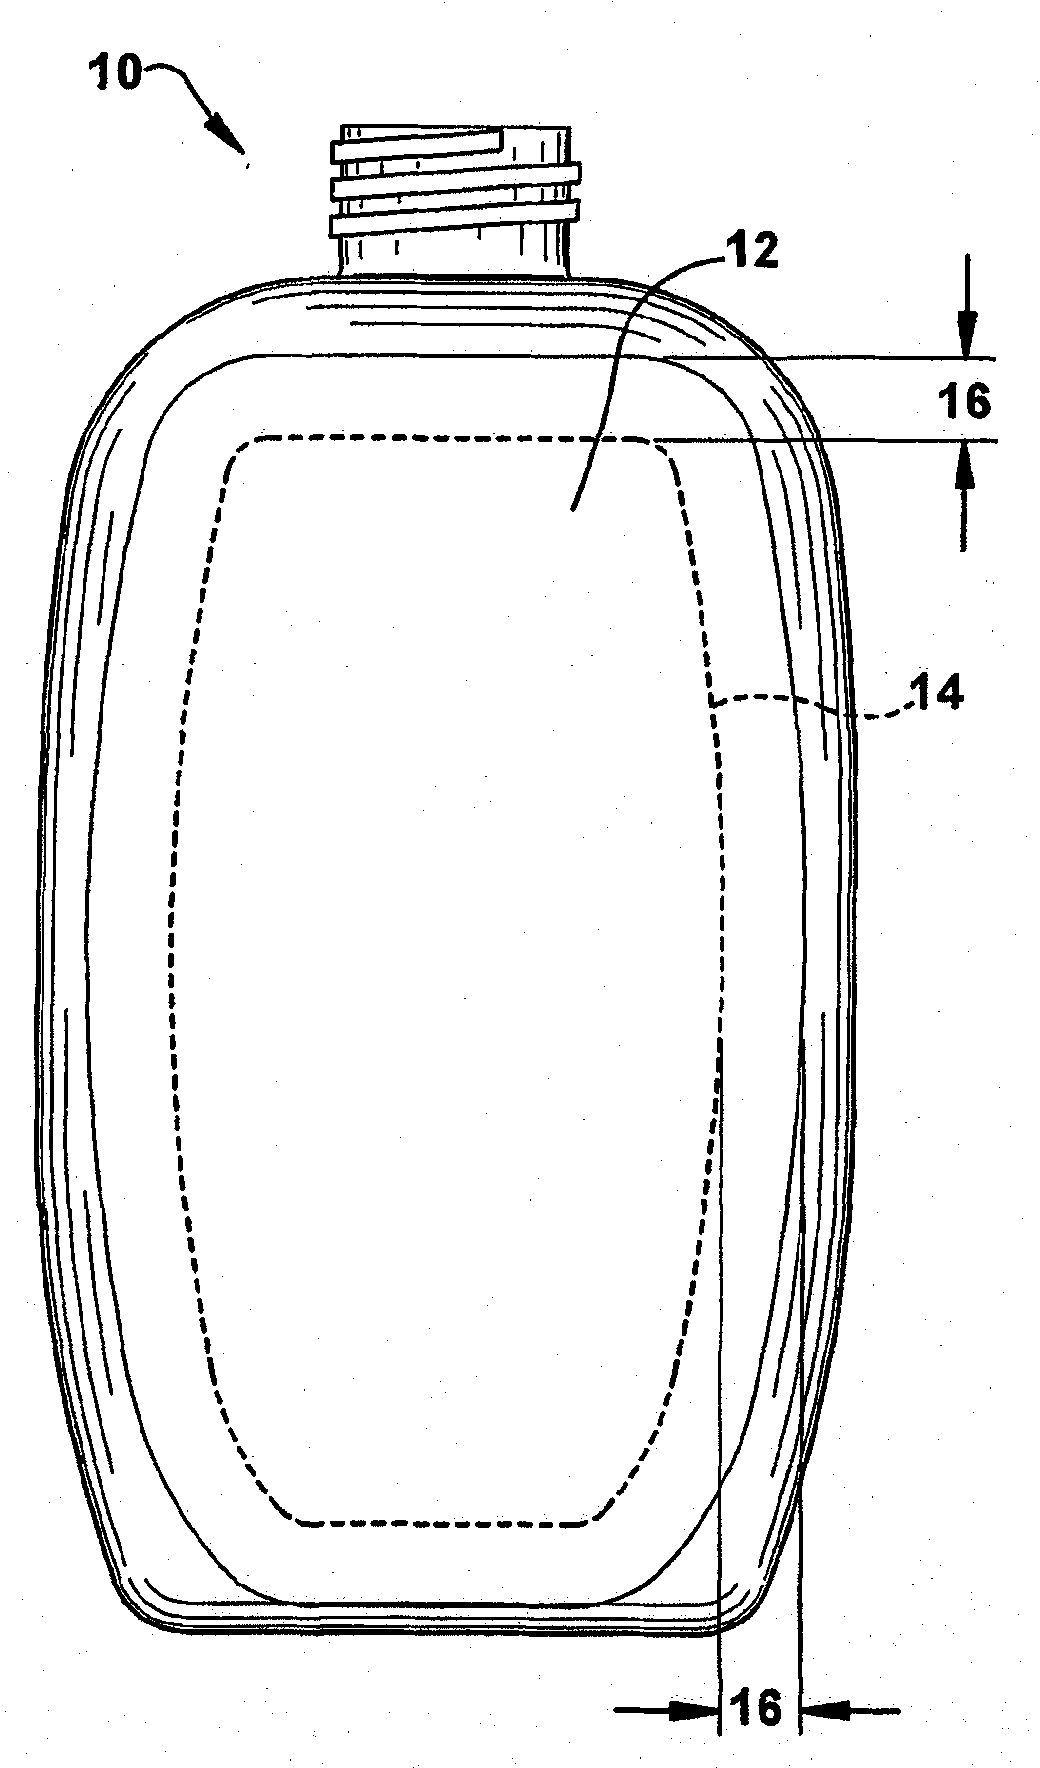 Method for applying a pressure sensitive shrink label to an article